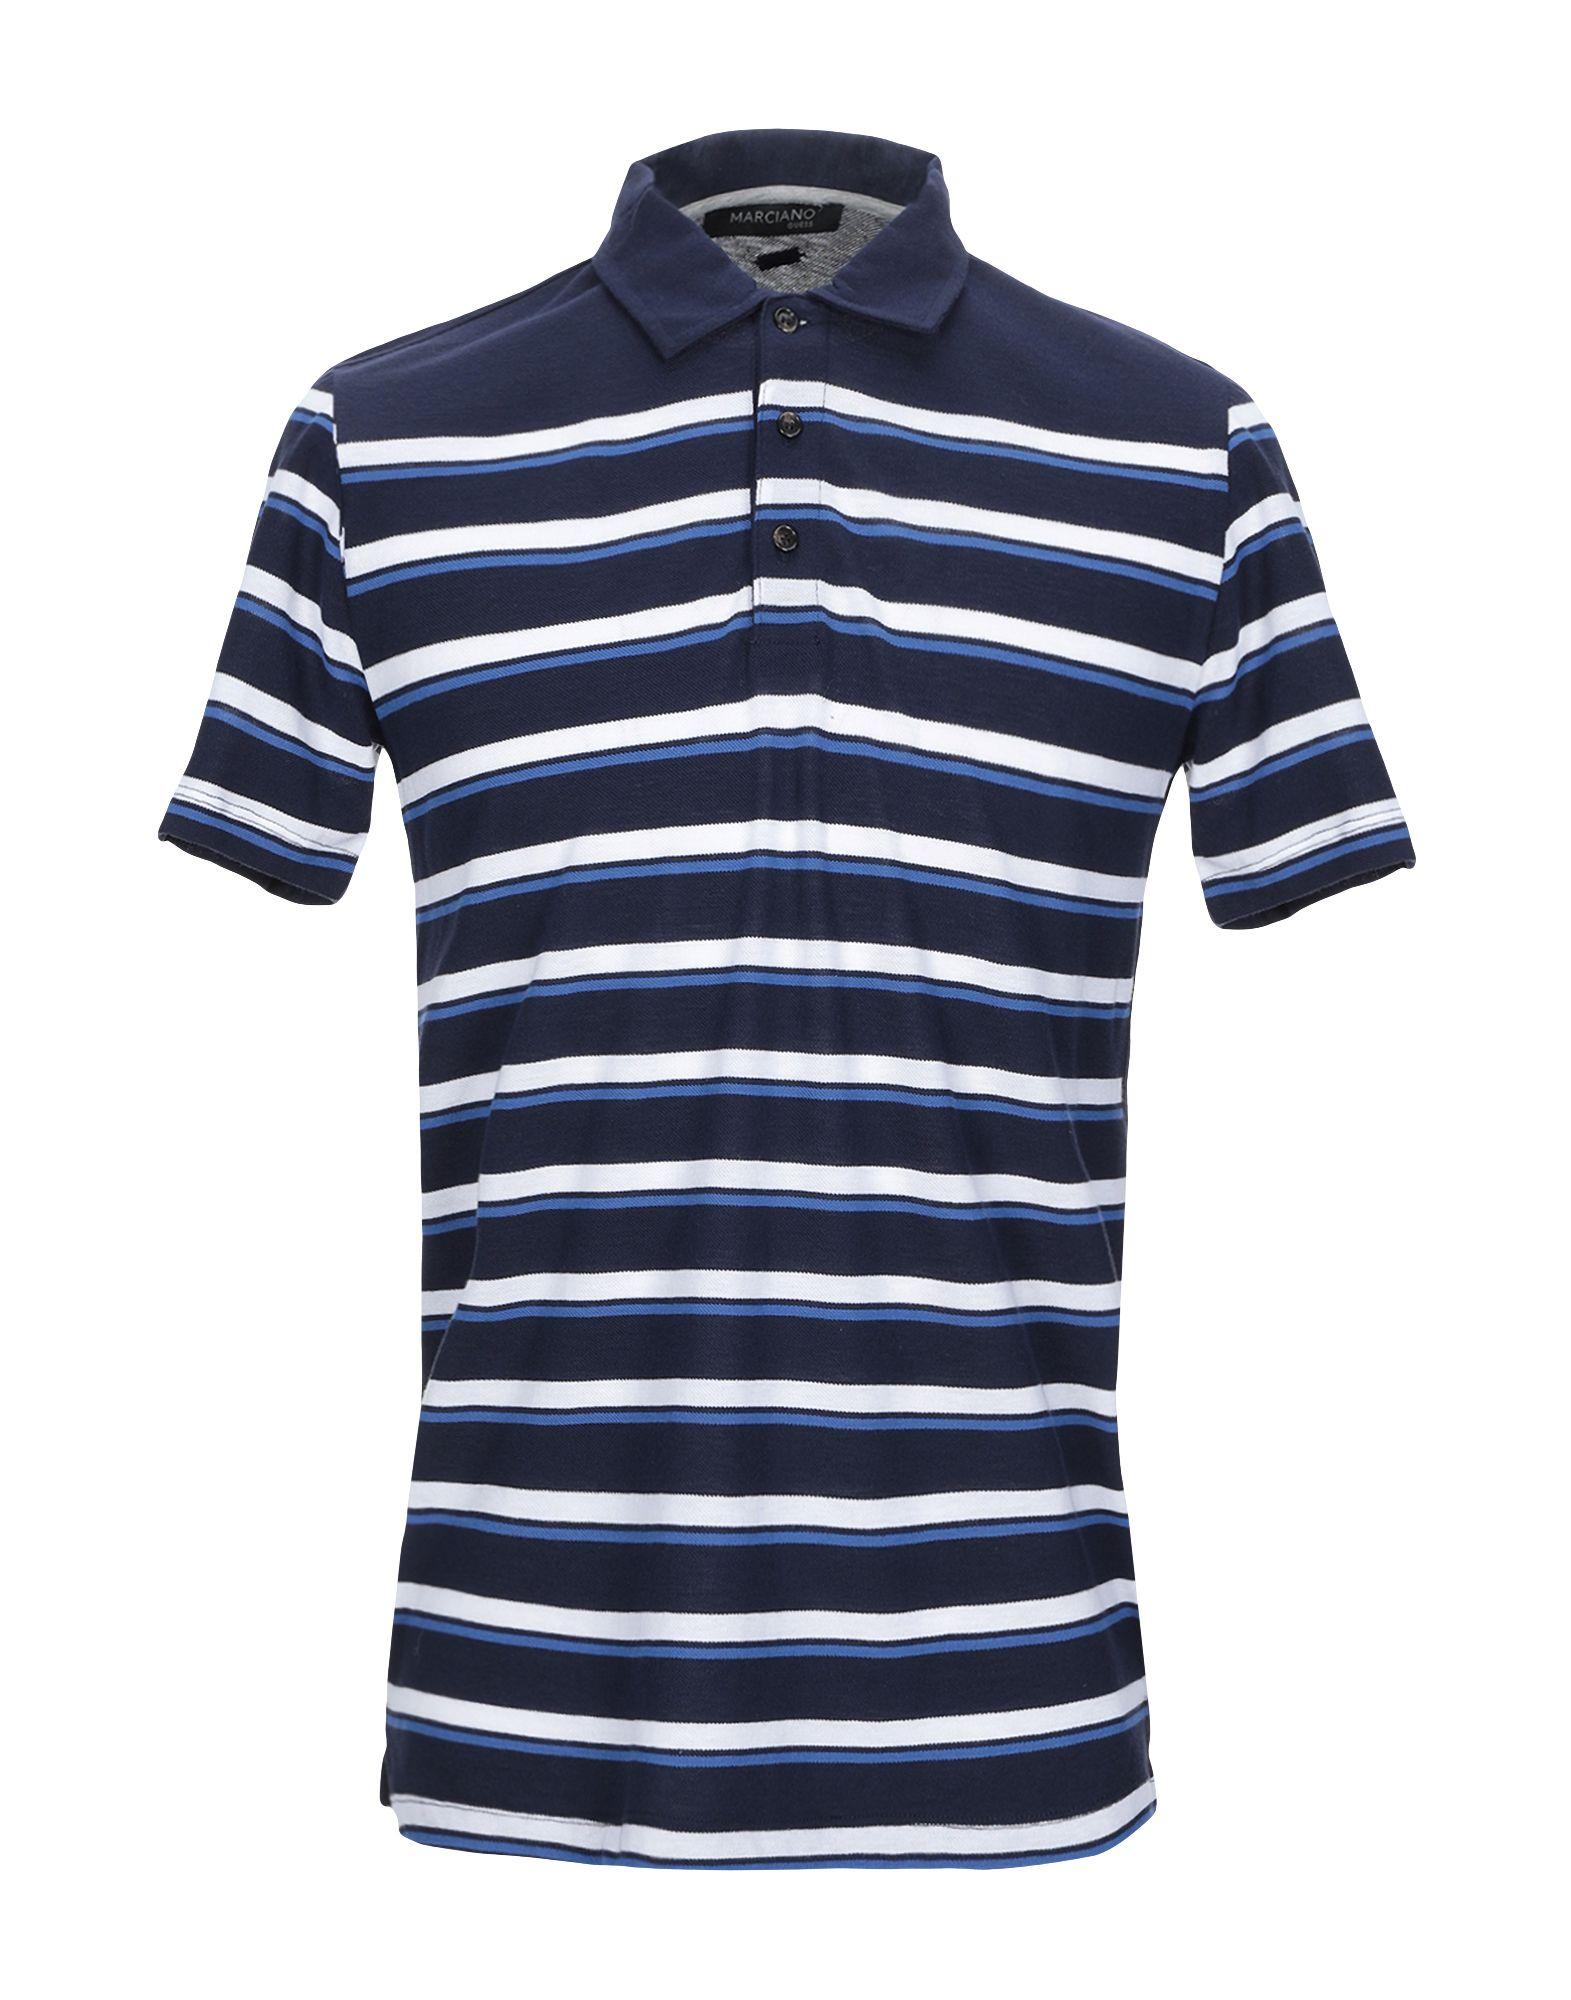 Guess Cotton Polo Shirt in Dark Blue (Blue) for Men - Lyst